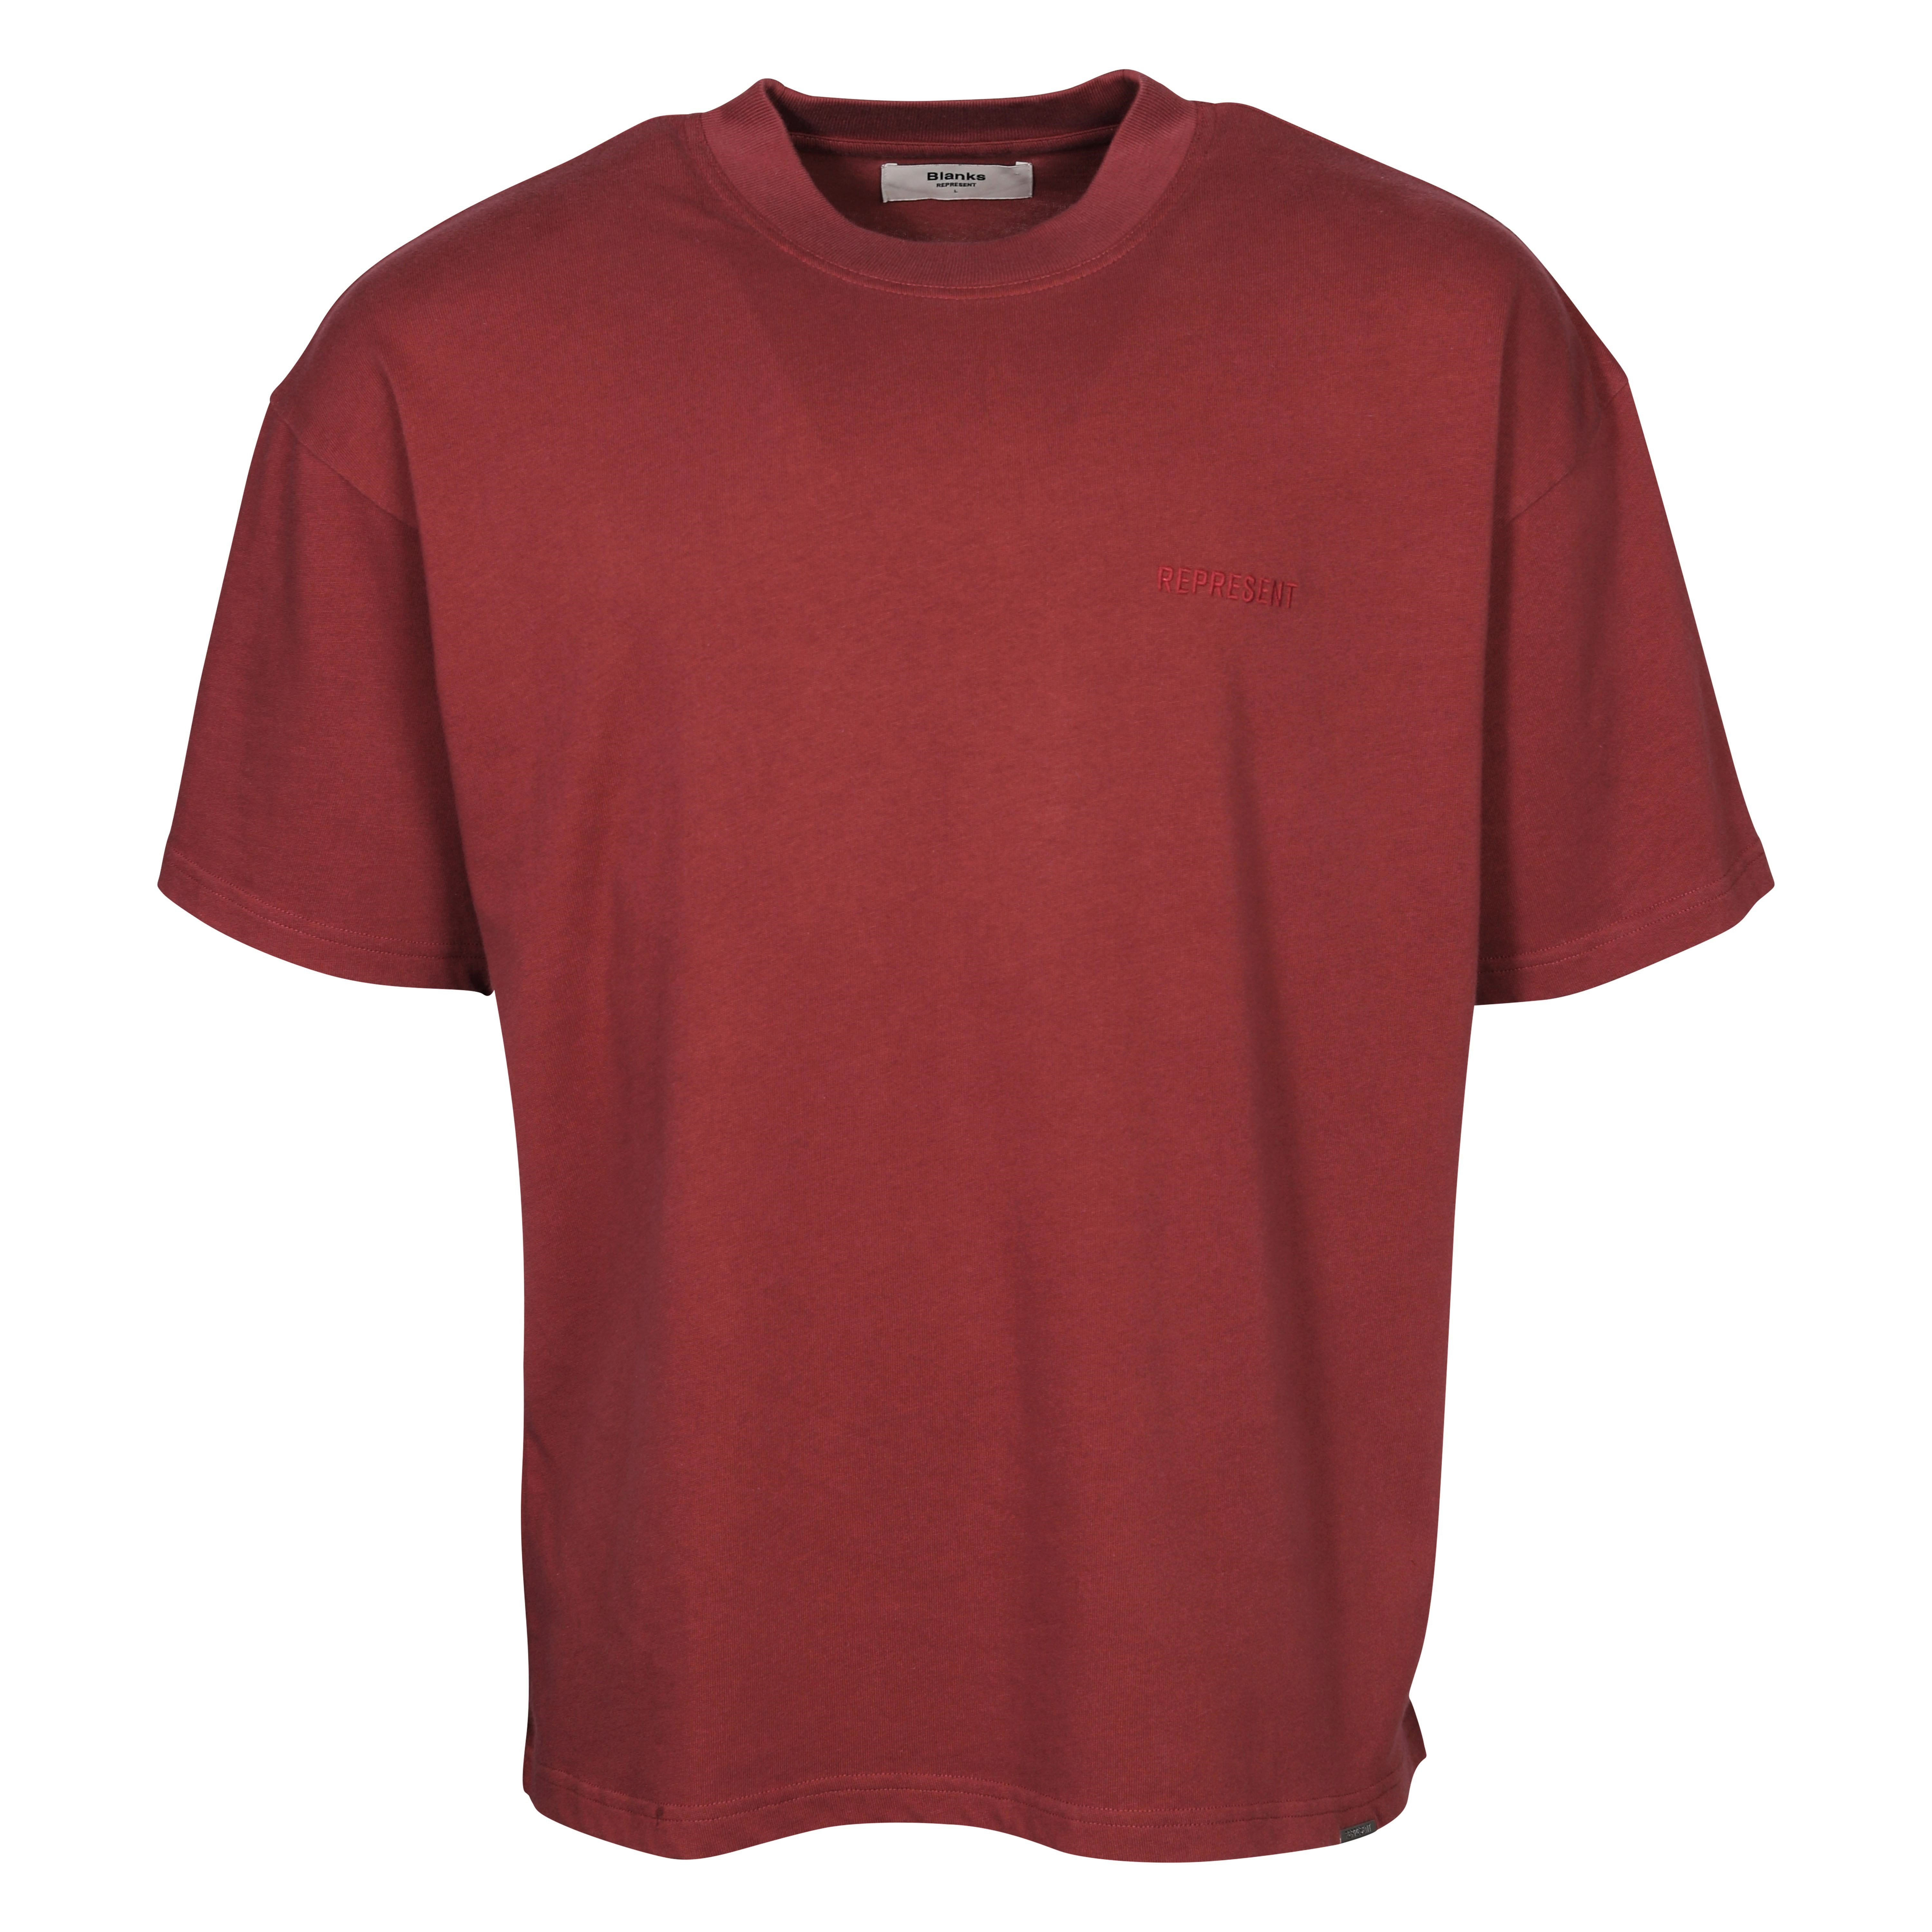 Represent Blank T-Shirt in Vintage Red